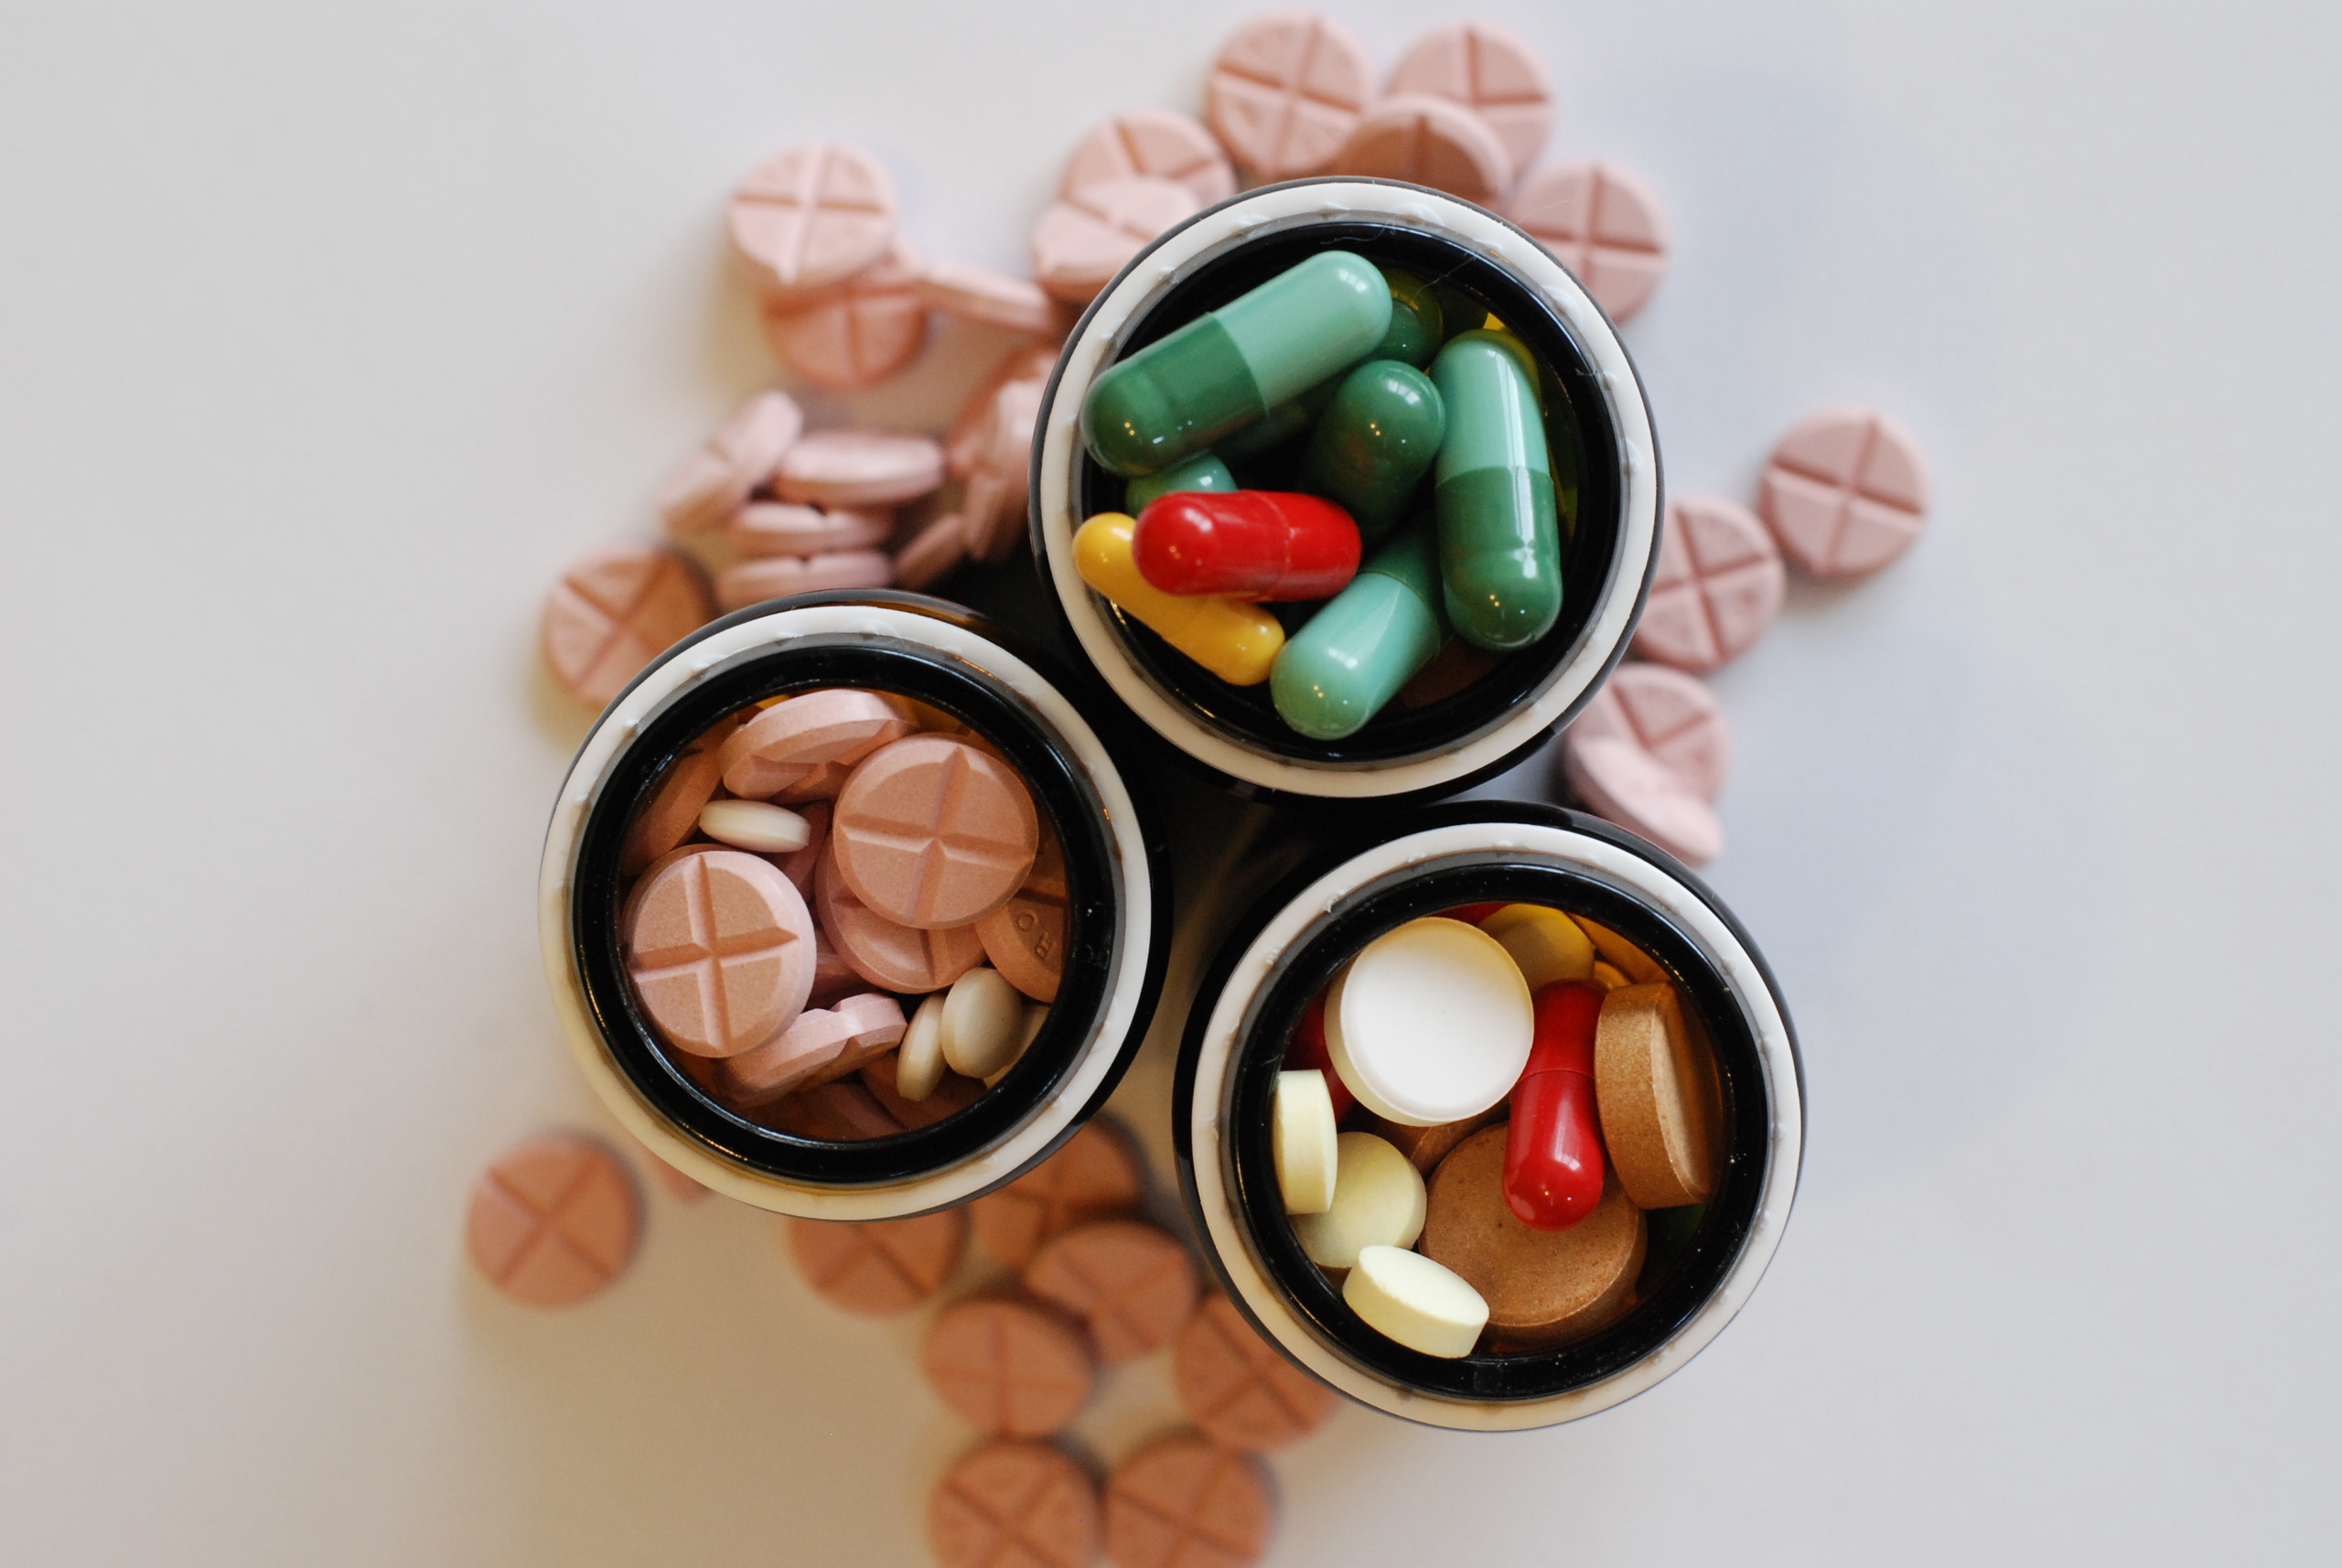 different colors and shapes of tablets and pills